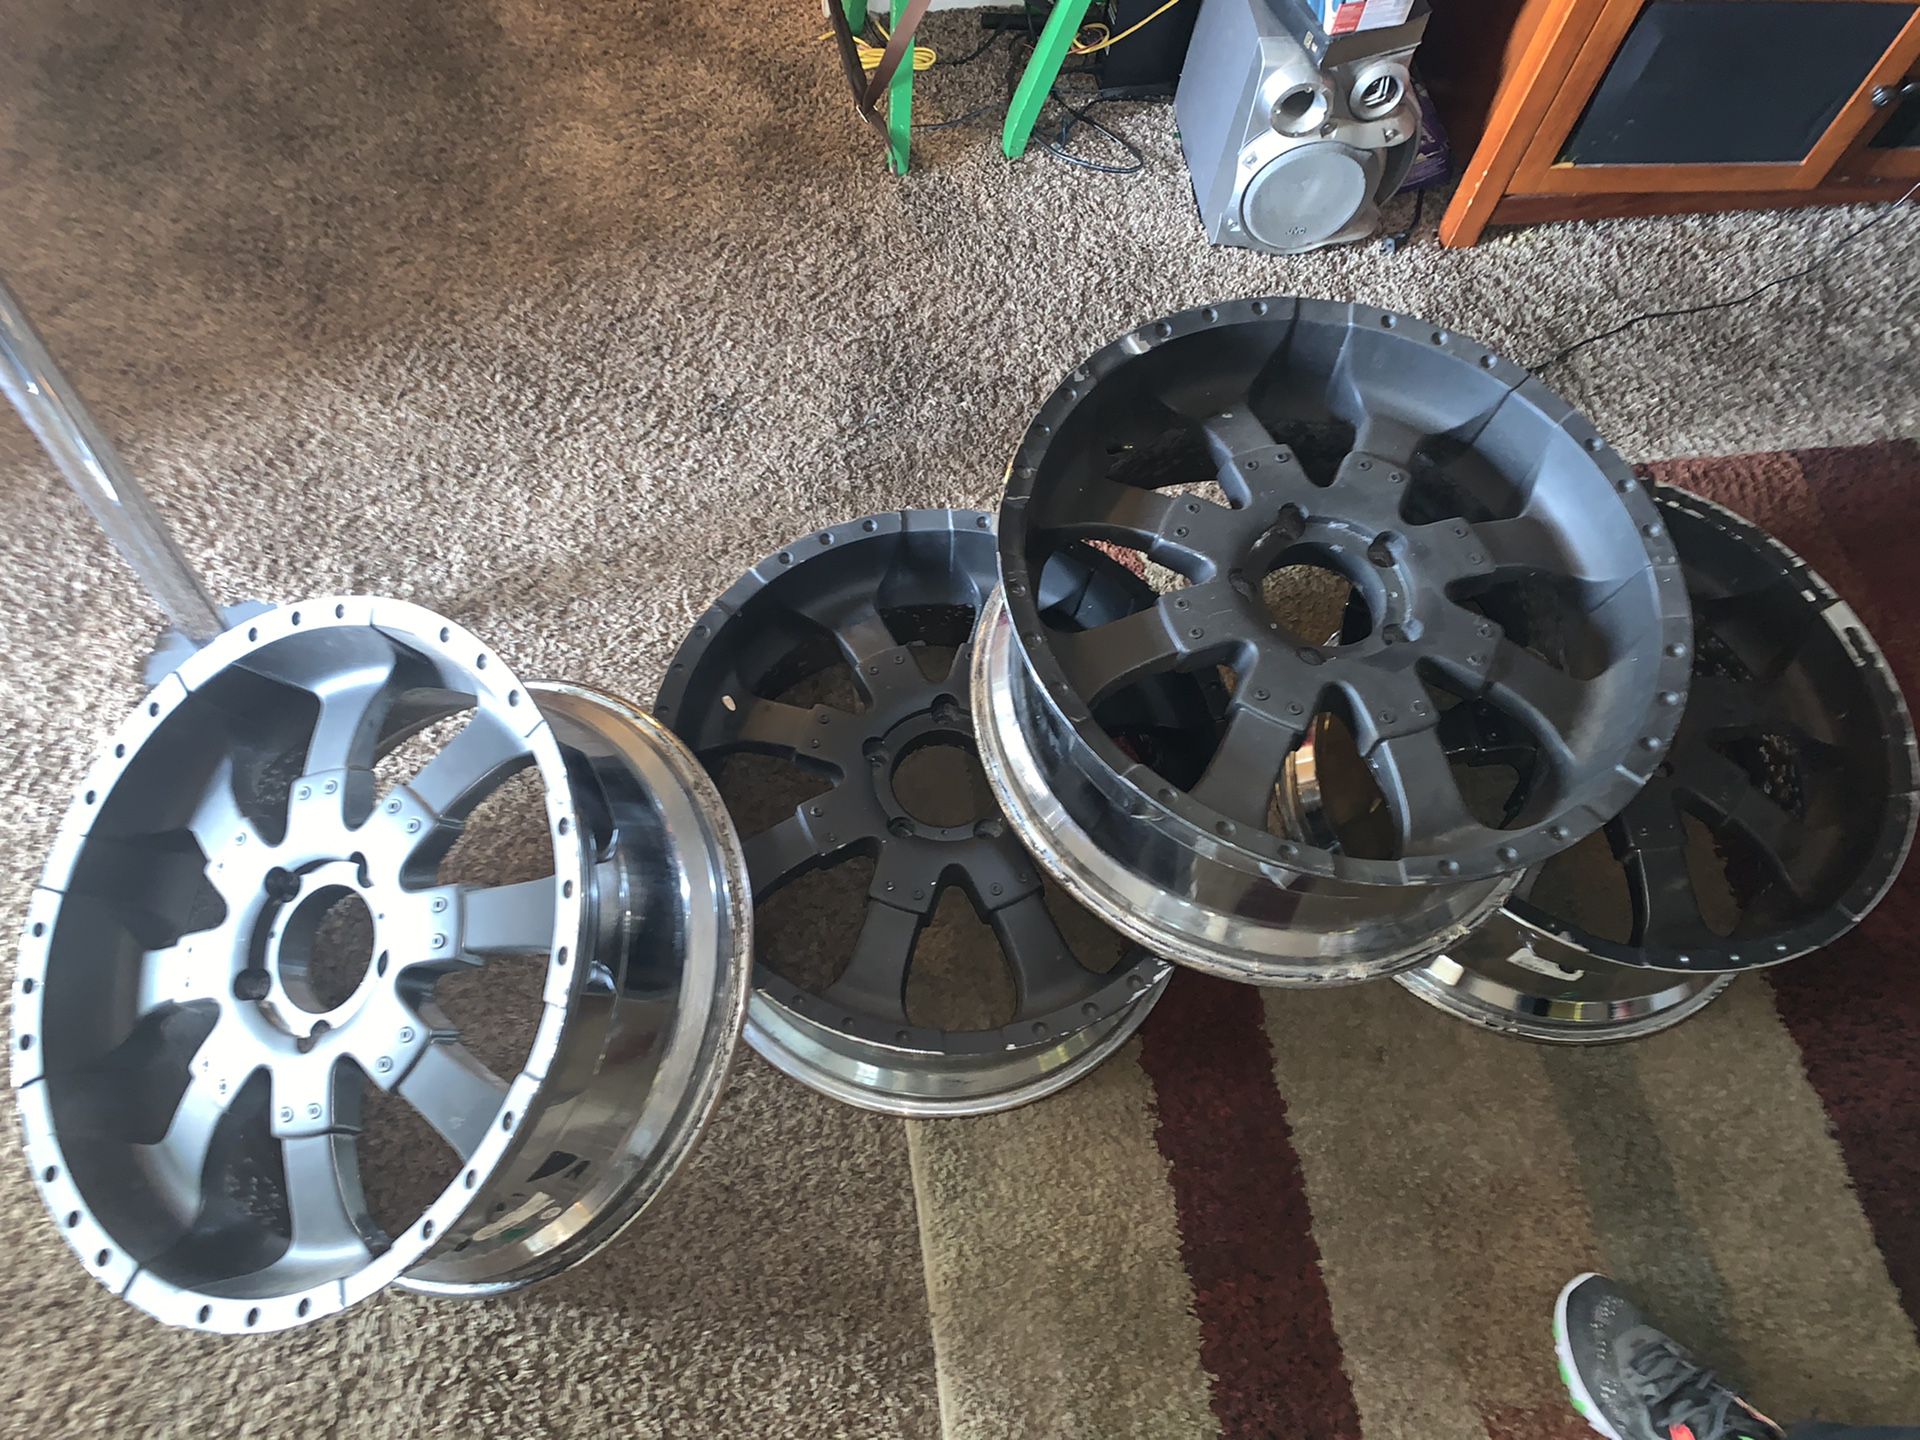 Chrome 22’s with rubber paint(able to peel off)